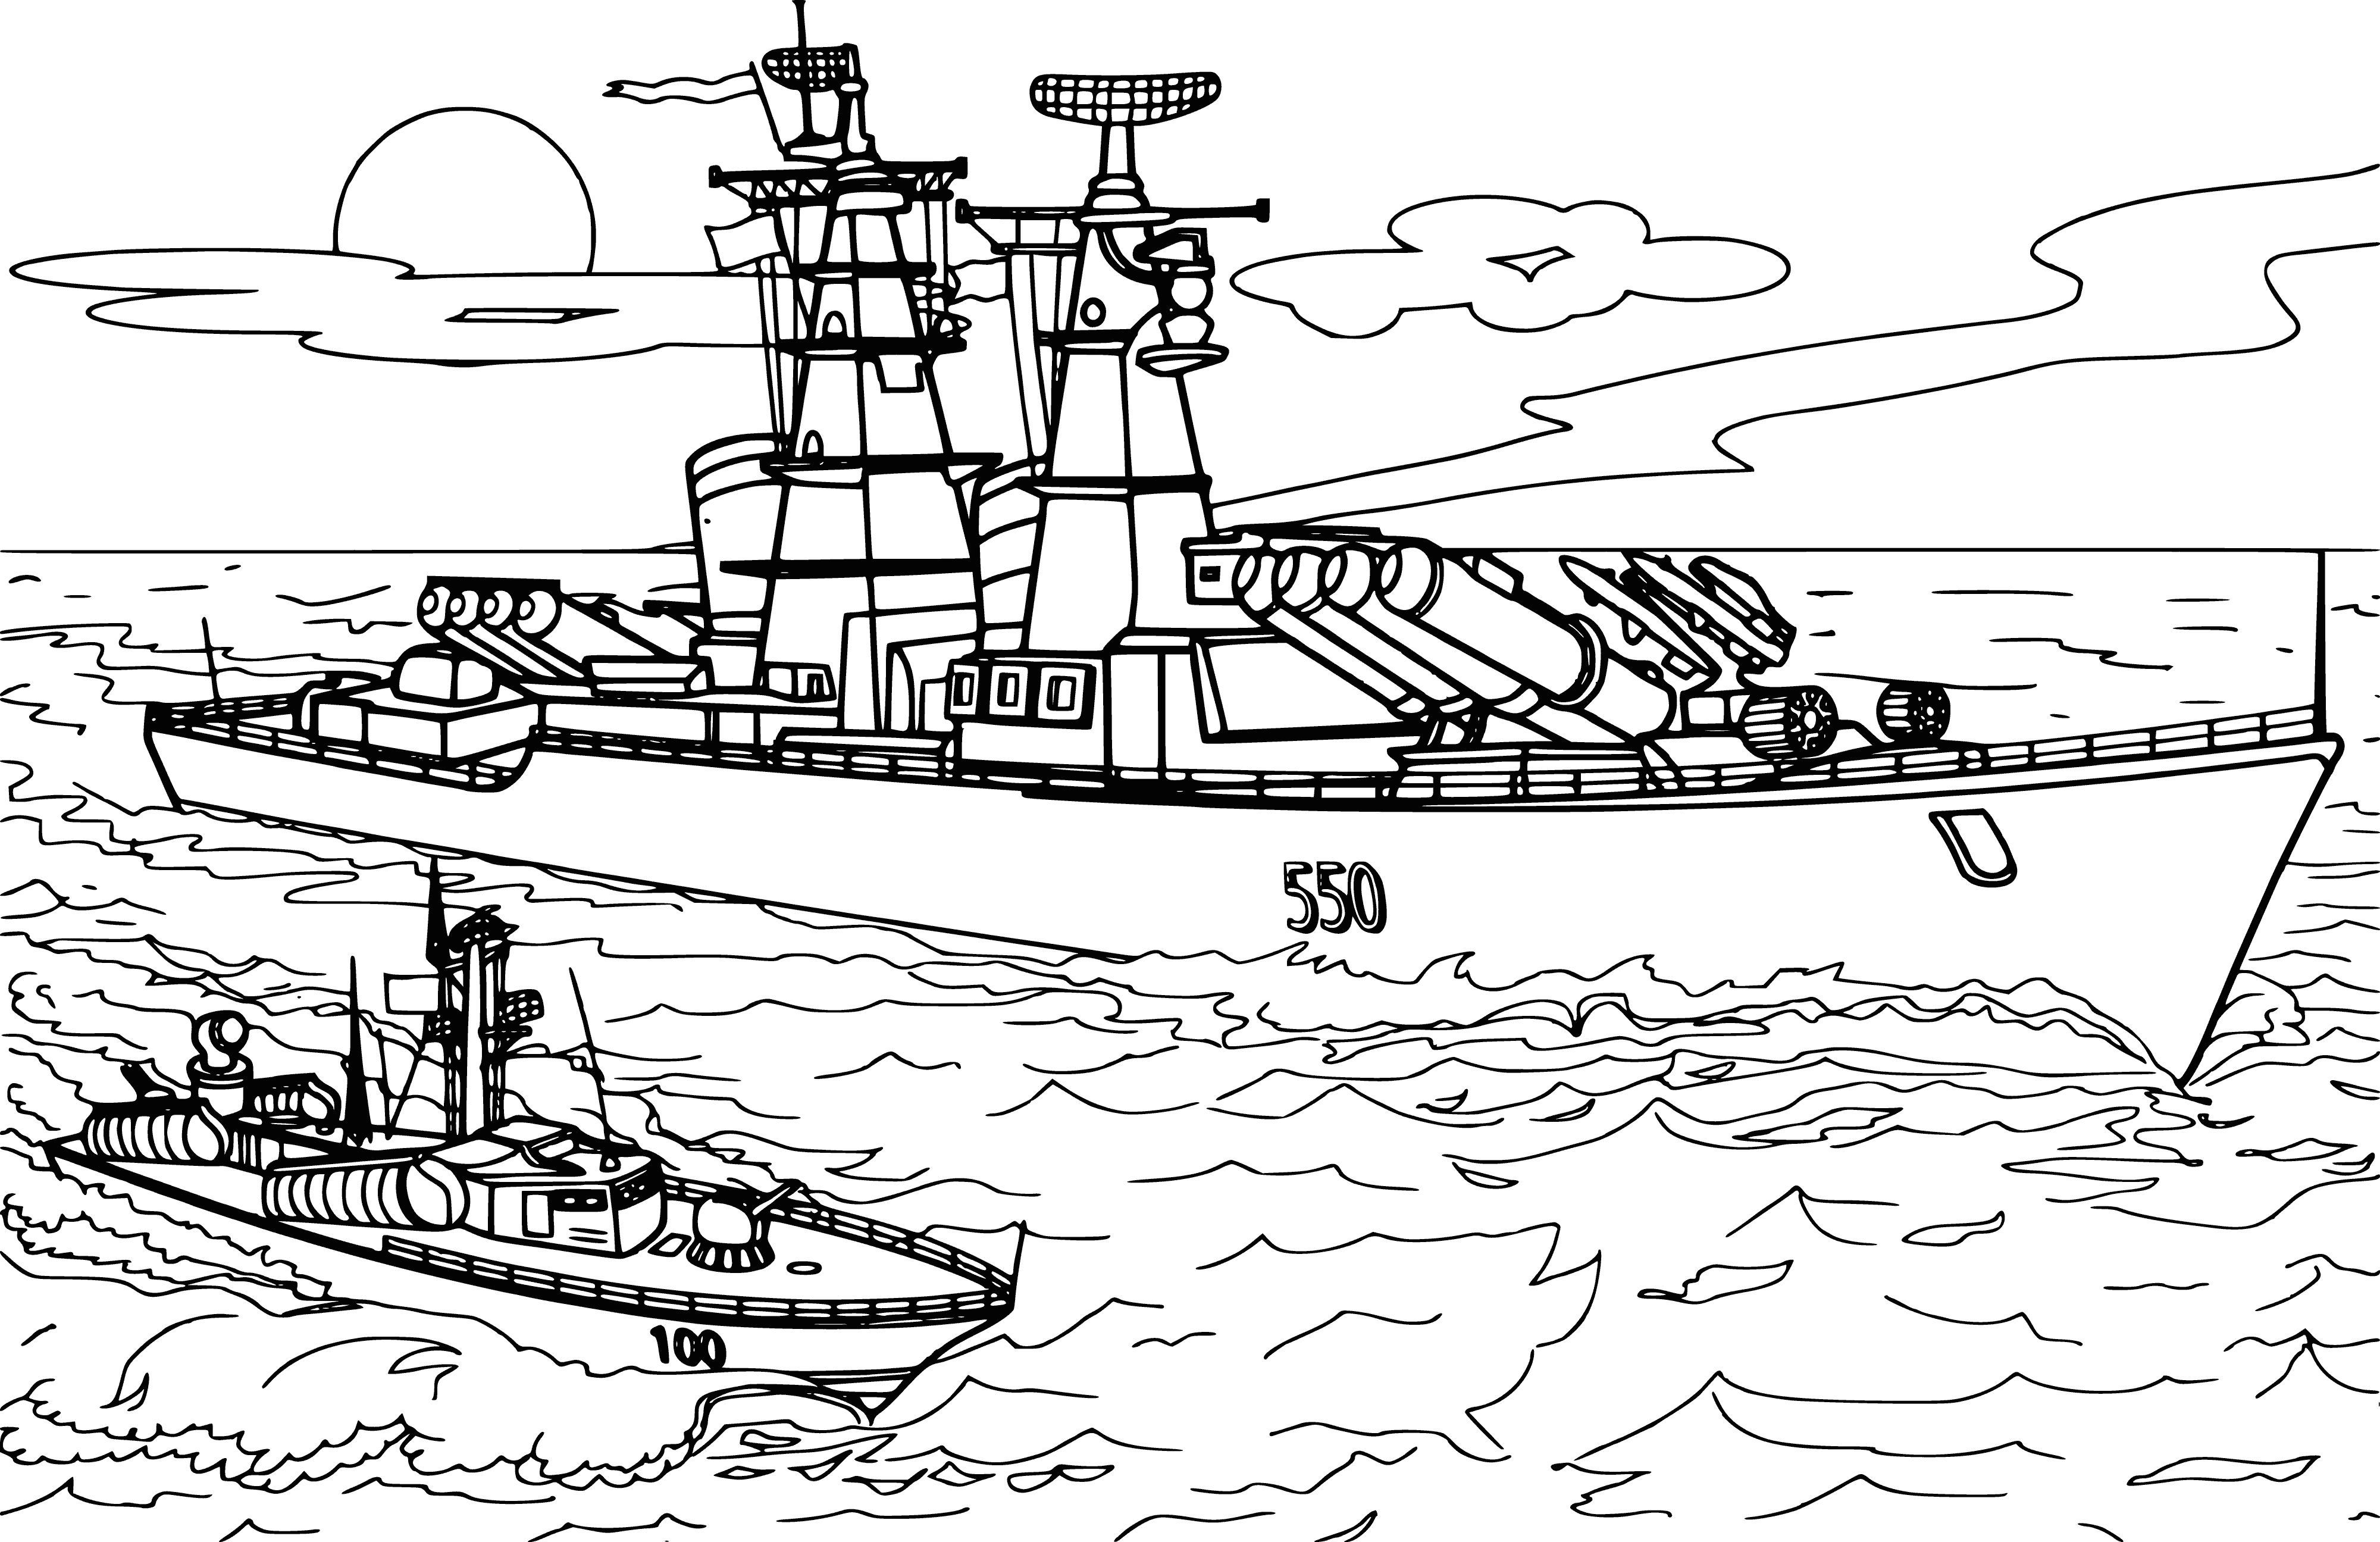 coloring page: Large round engine powers pointy spacecraft off launchpad. Long, thin vessels reach the cockpit & flames propel craft skyward.